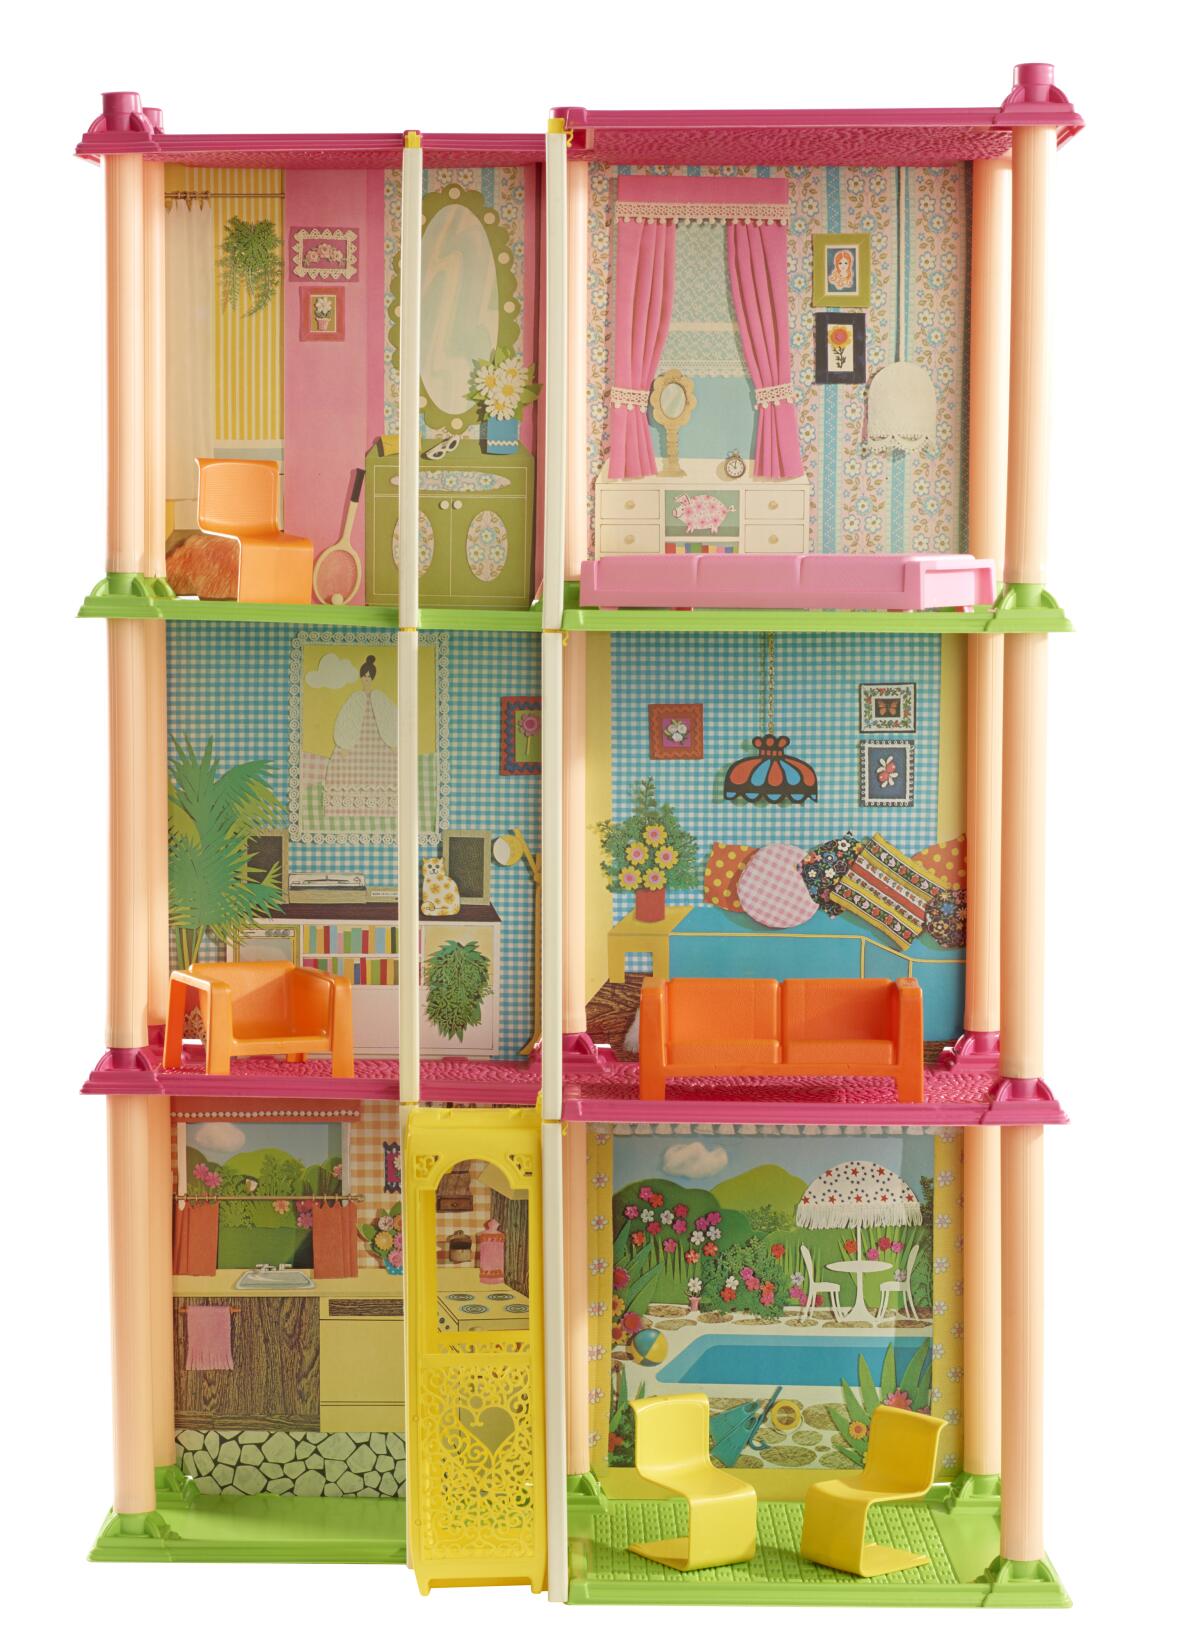 A dollhouse made from cardboard and plastic takes the form of a three-story townhouse decorated in '70s-era craft styles